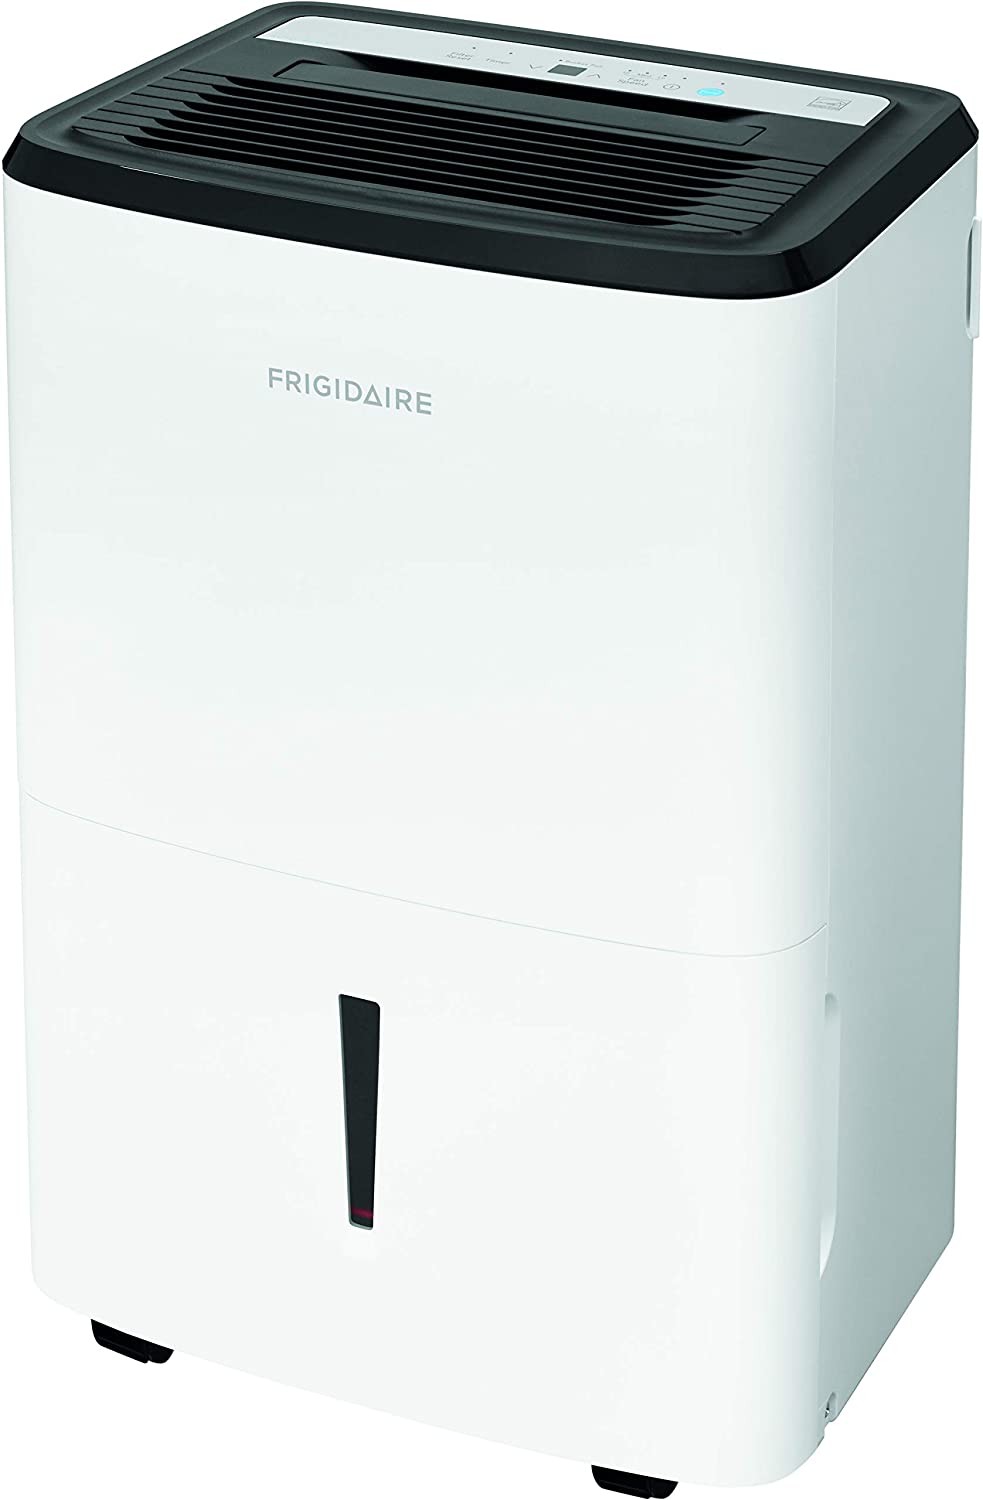 Frigidaire 50-Pint Dehumidifier with Built-in Pump